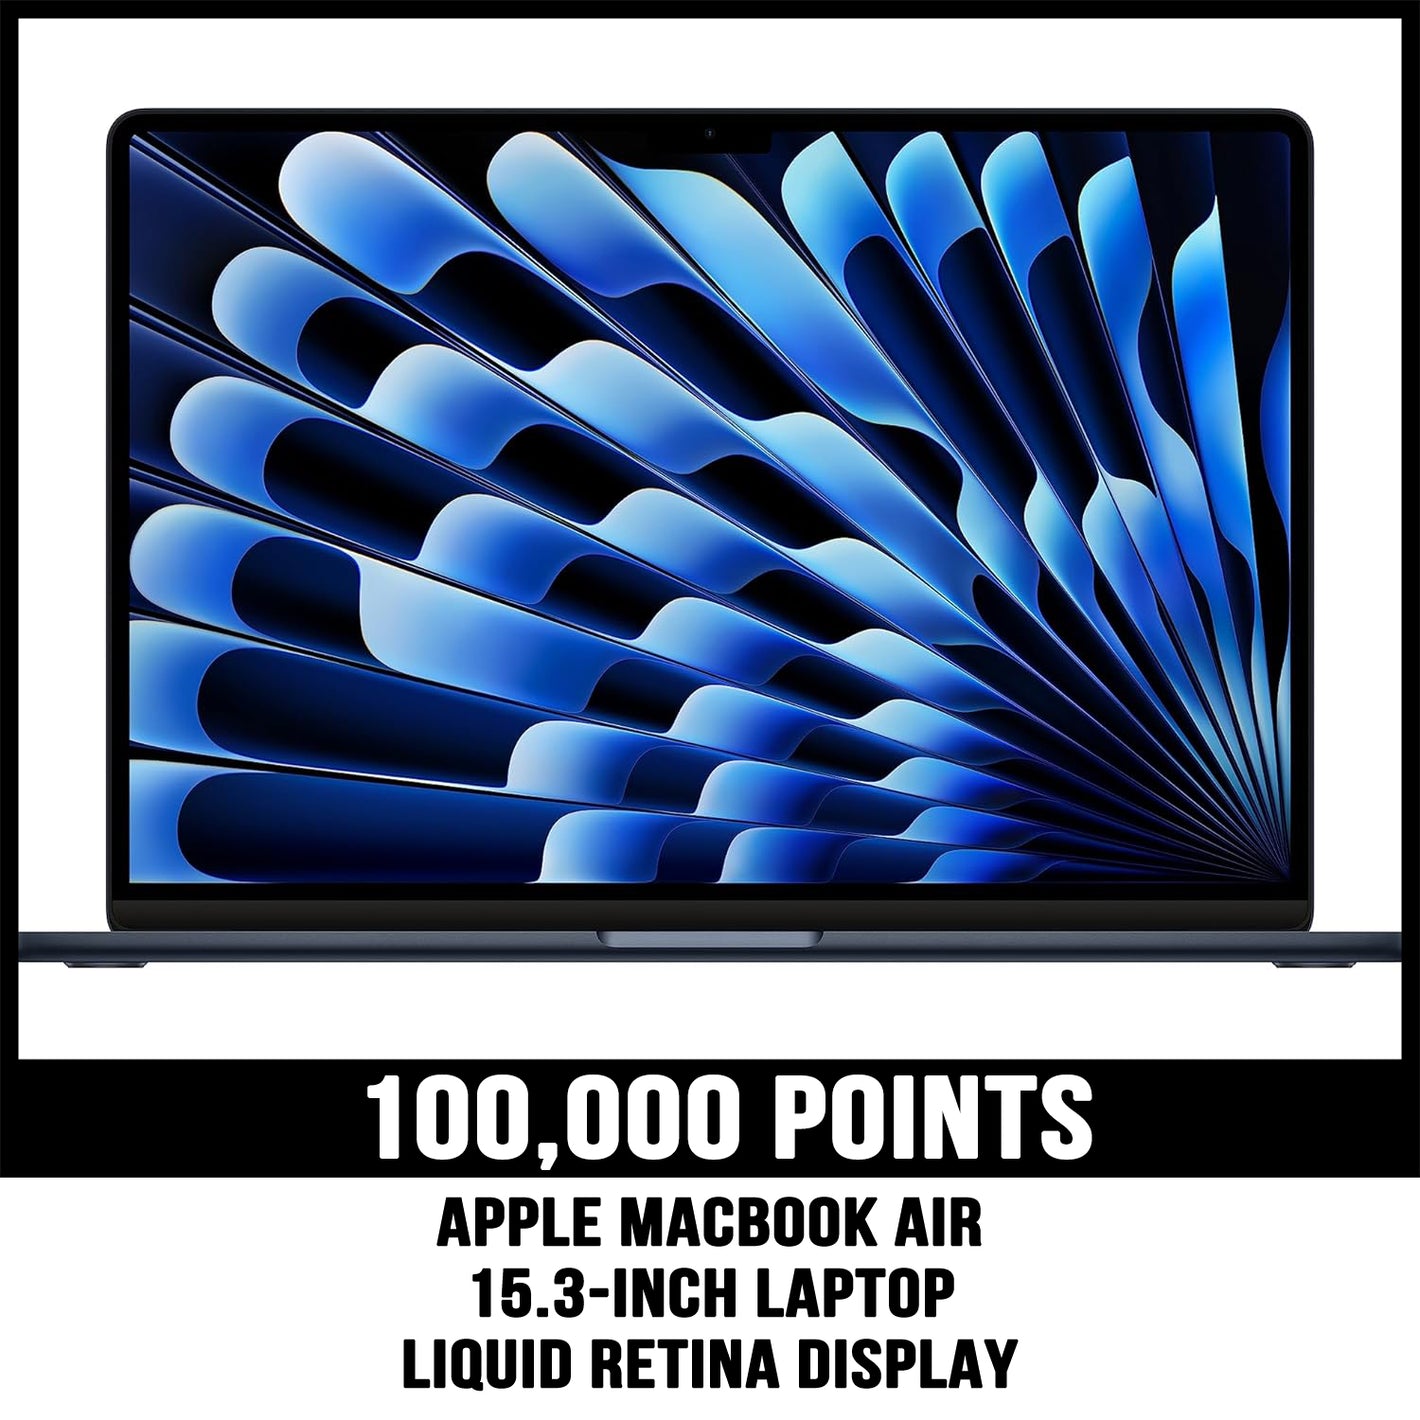 Apple Macbook Air prize for 100000 points